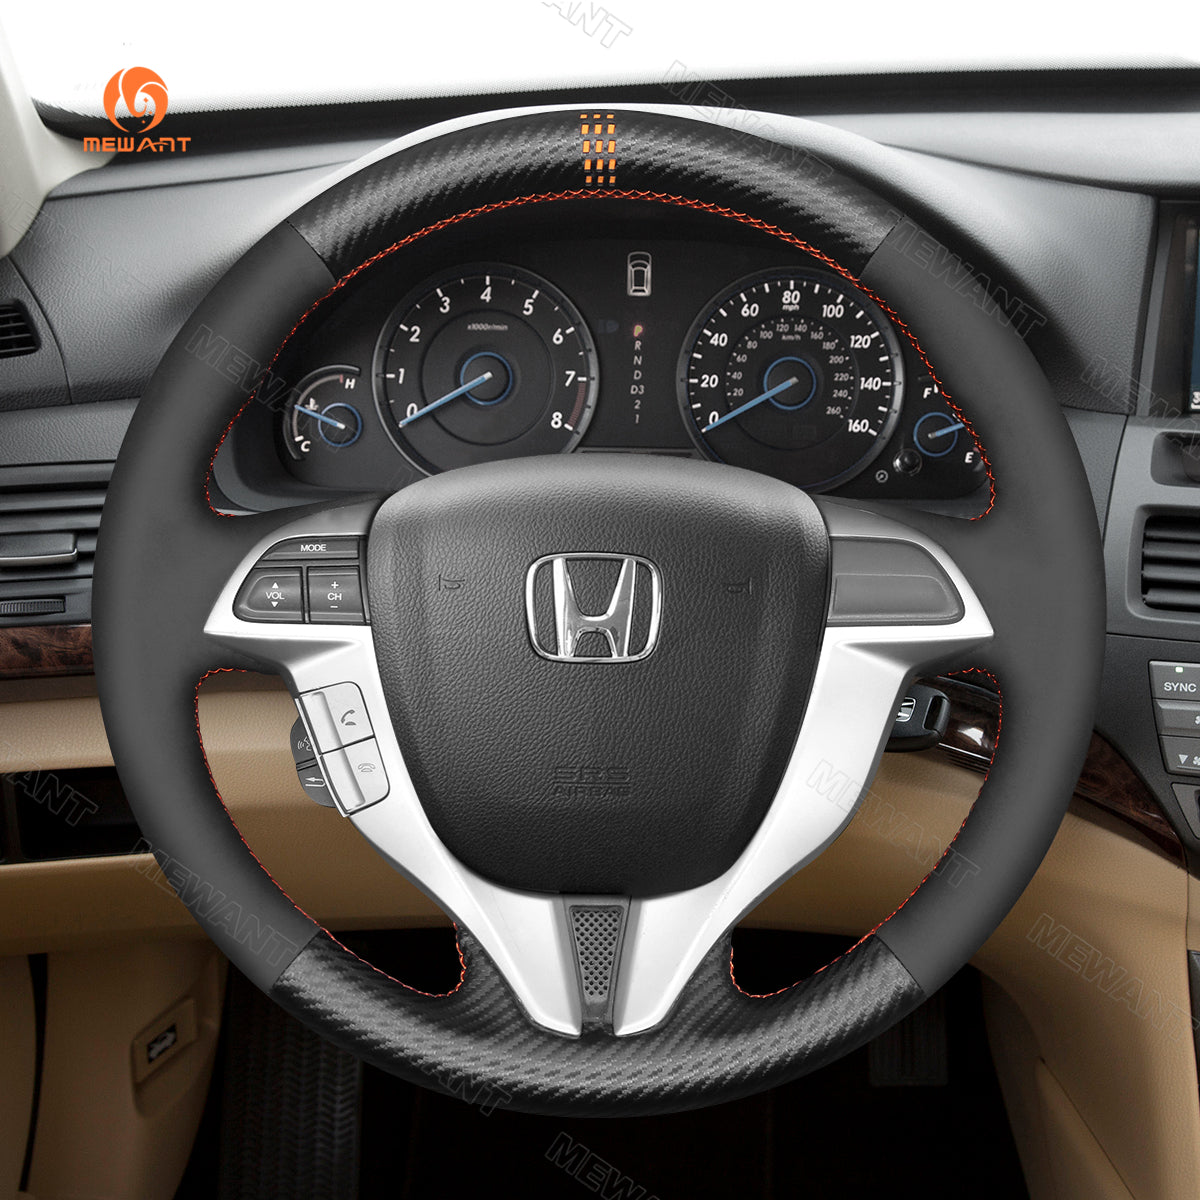 MEWANT Hand Stitch Black Leather Car Steering Wheel  Cover for Honda Accord Coupe 8 2008-2012 / Accord Crosstour 2010-2012